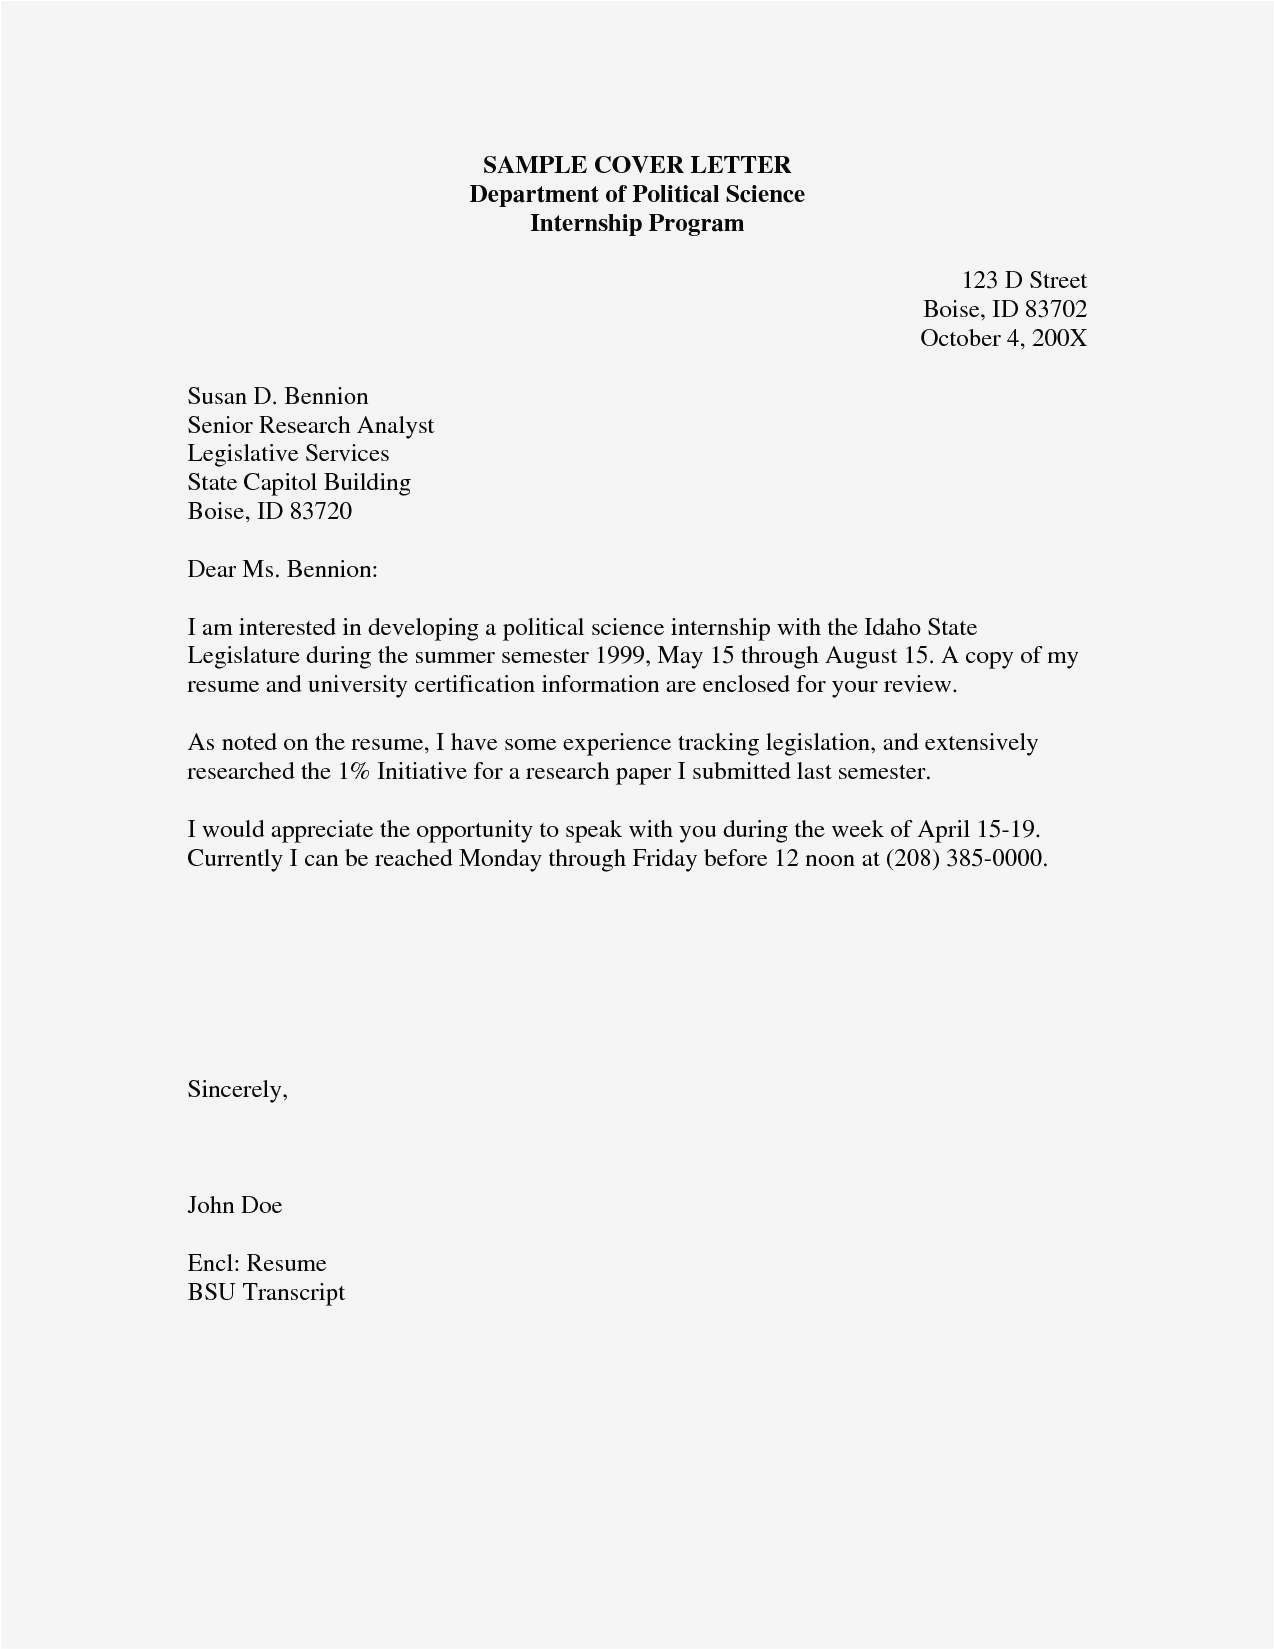 Sample Cover Letter for Resume No Experience 26 No Experience Cover Letter